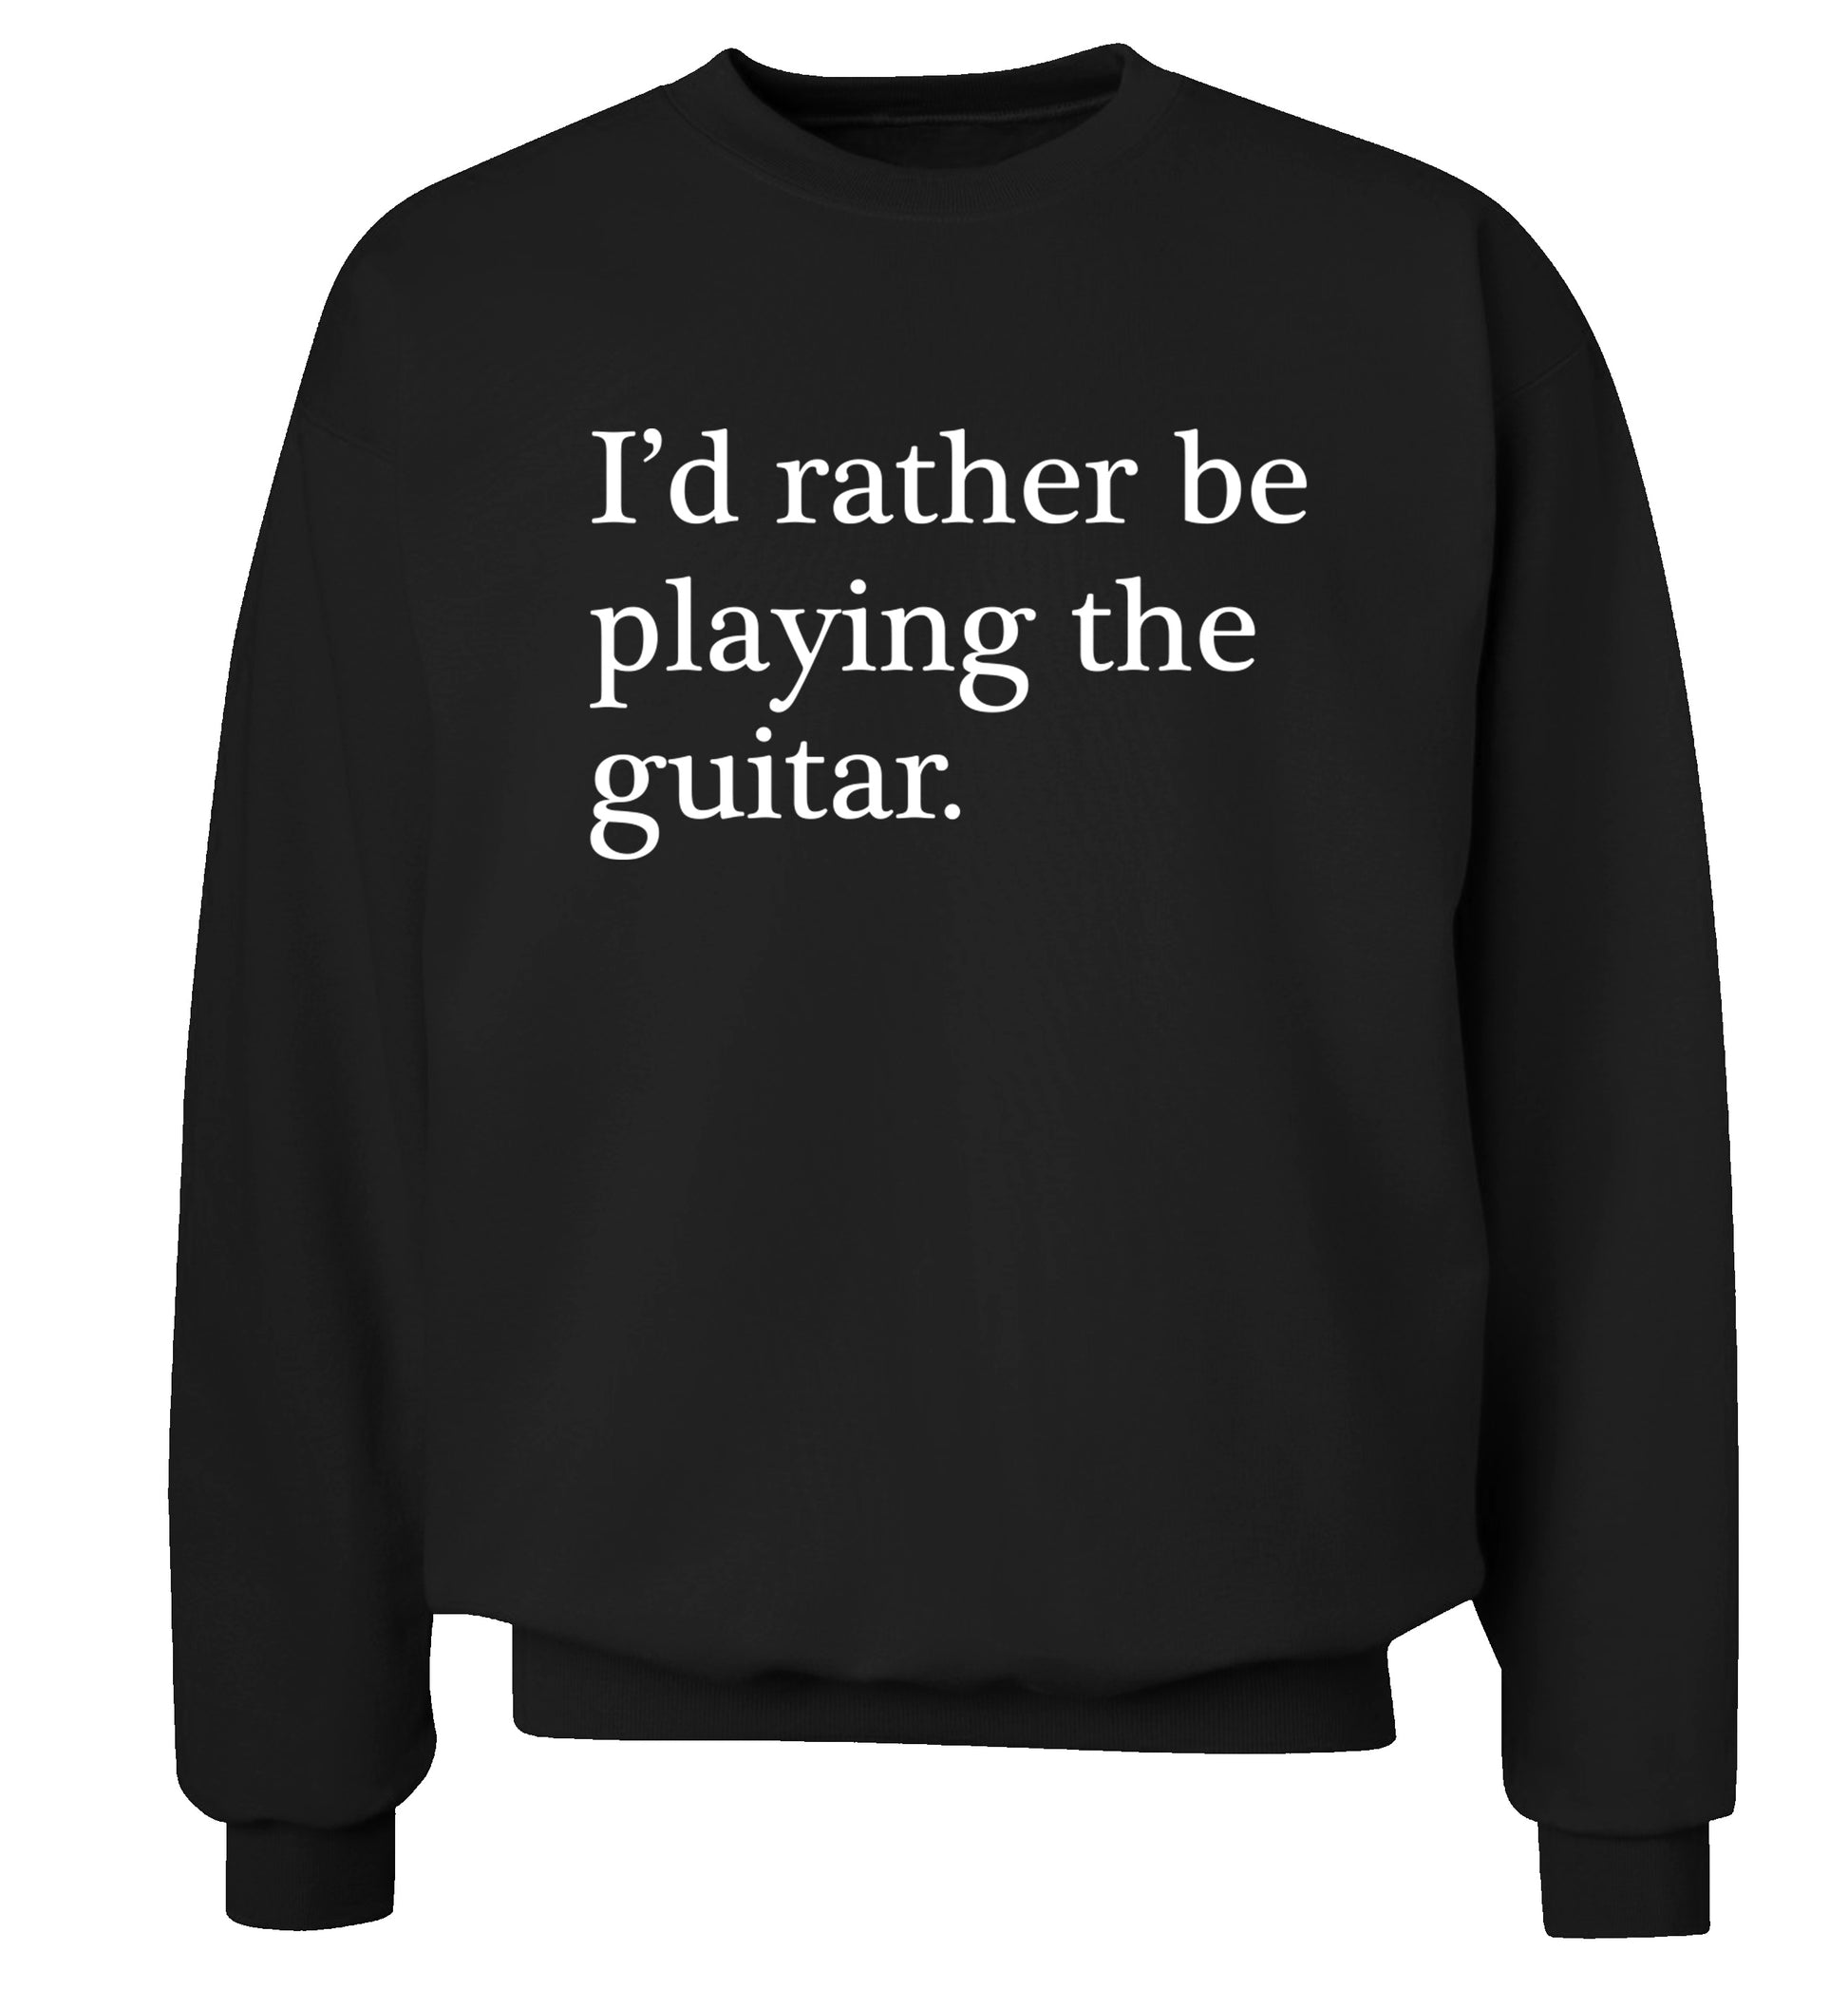 I'd rather be playing the guitar Adult's unisex black Sweater 2XL